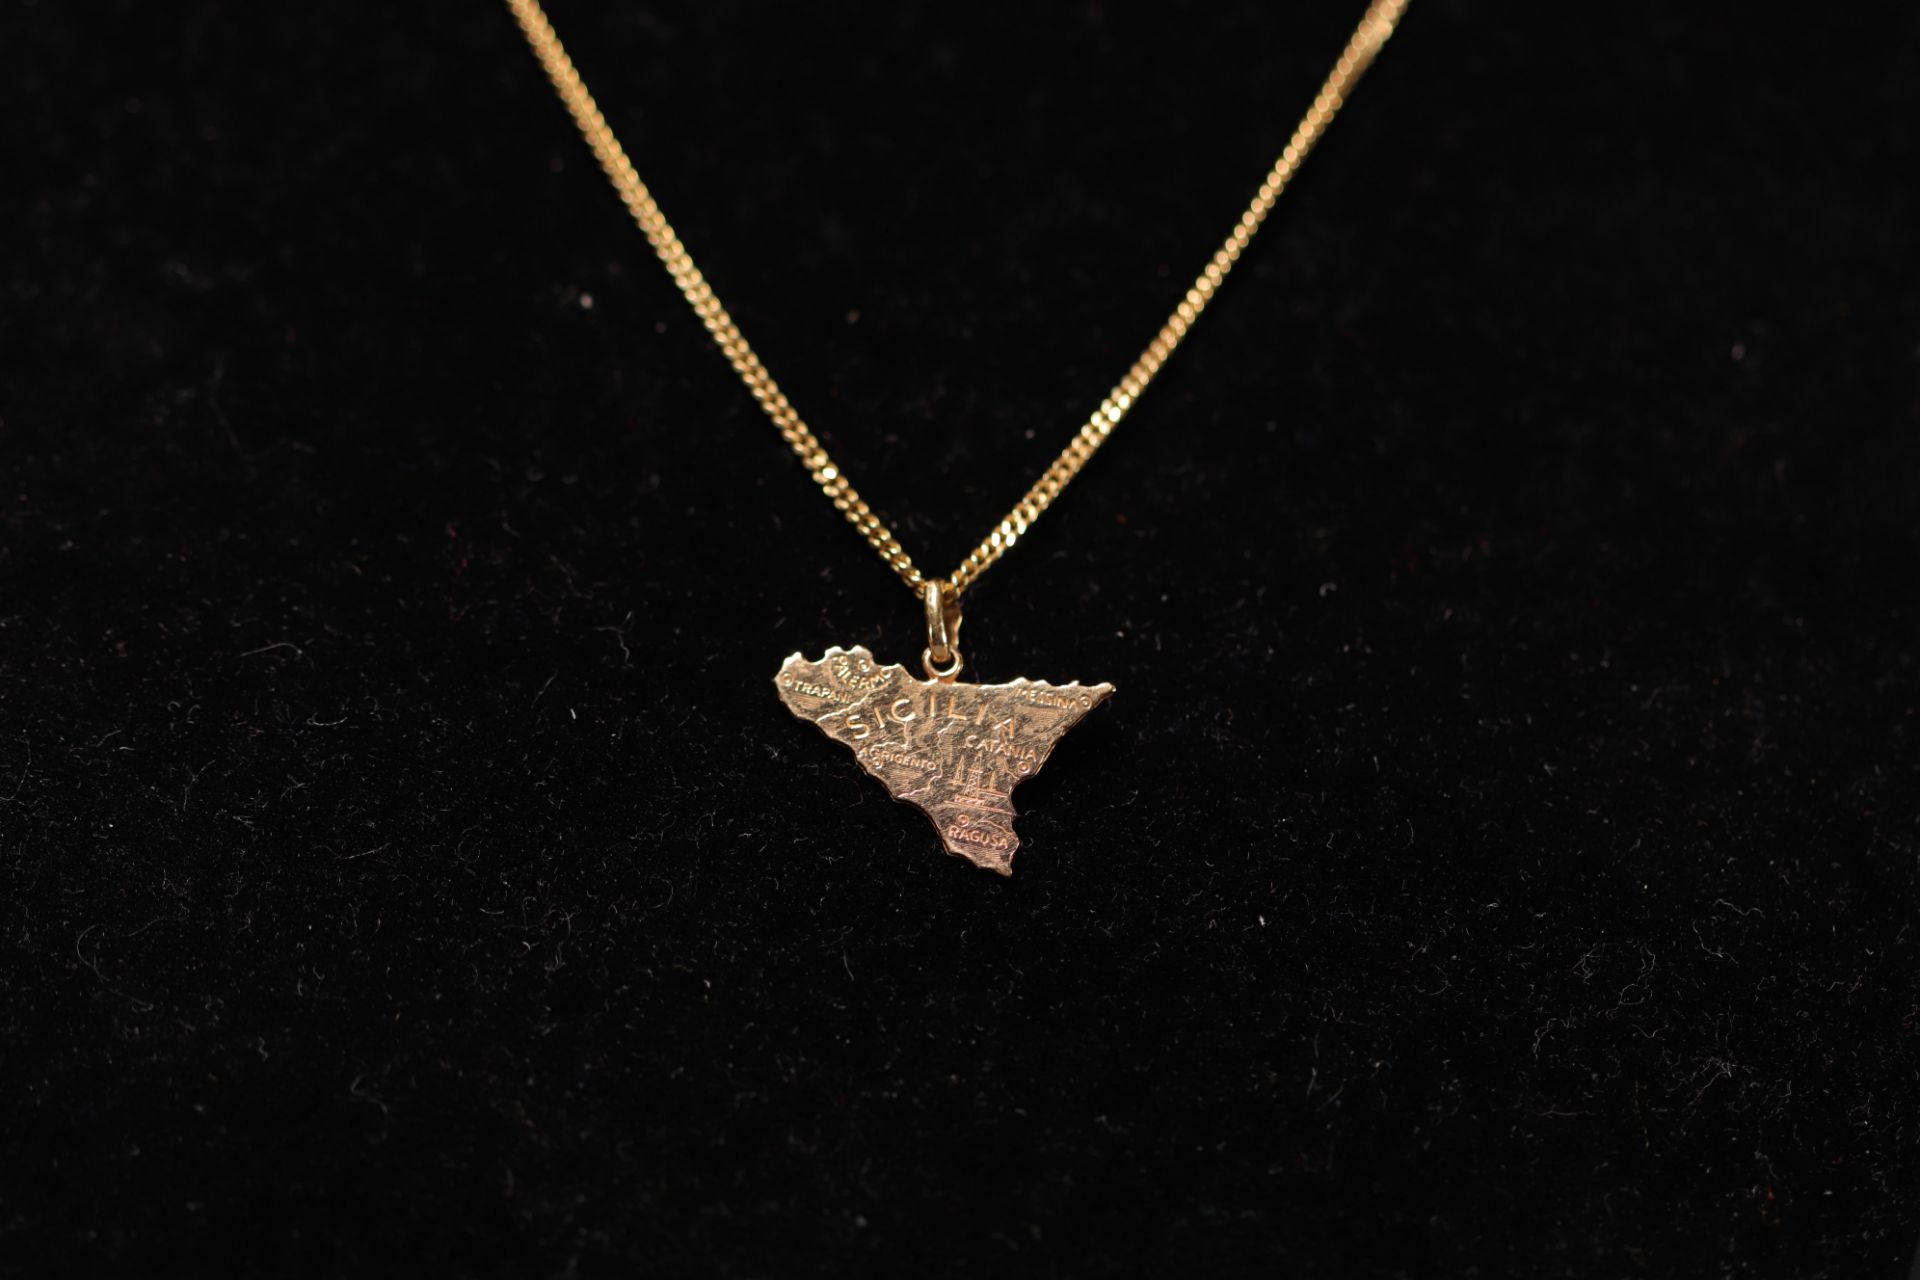 18K yellow gold pendant representing the map of Sicily, total weight 8g. - Image 3 of 3